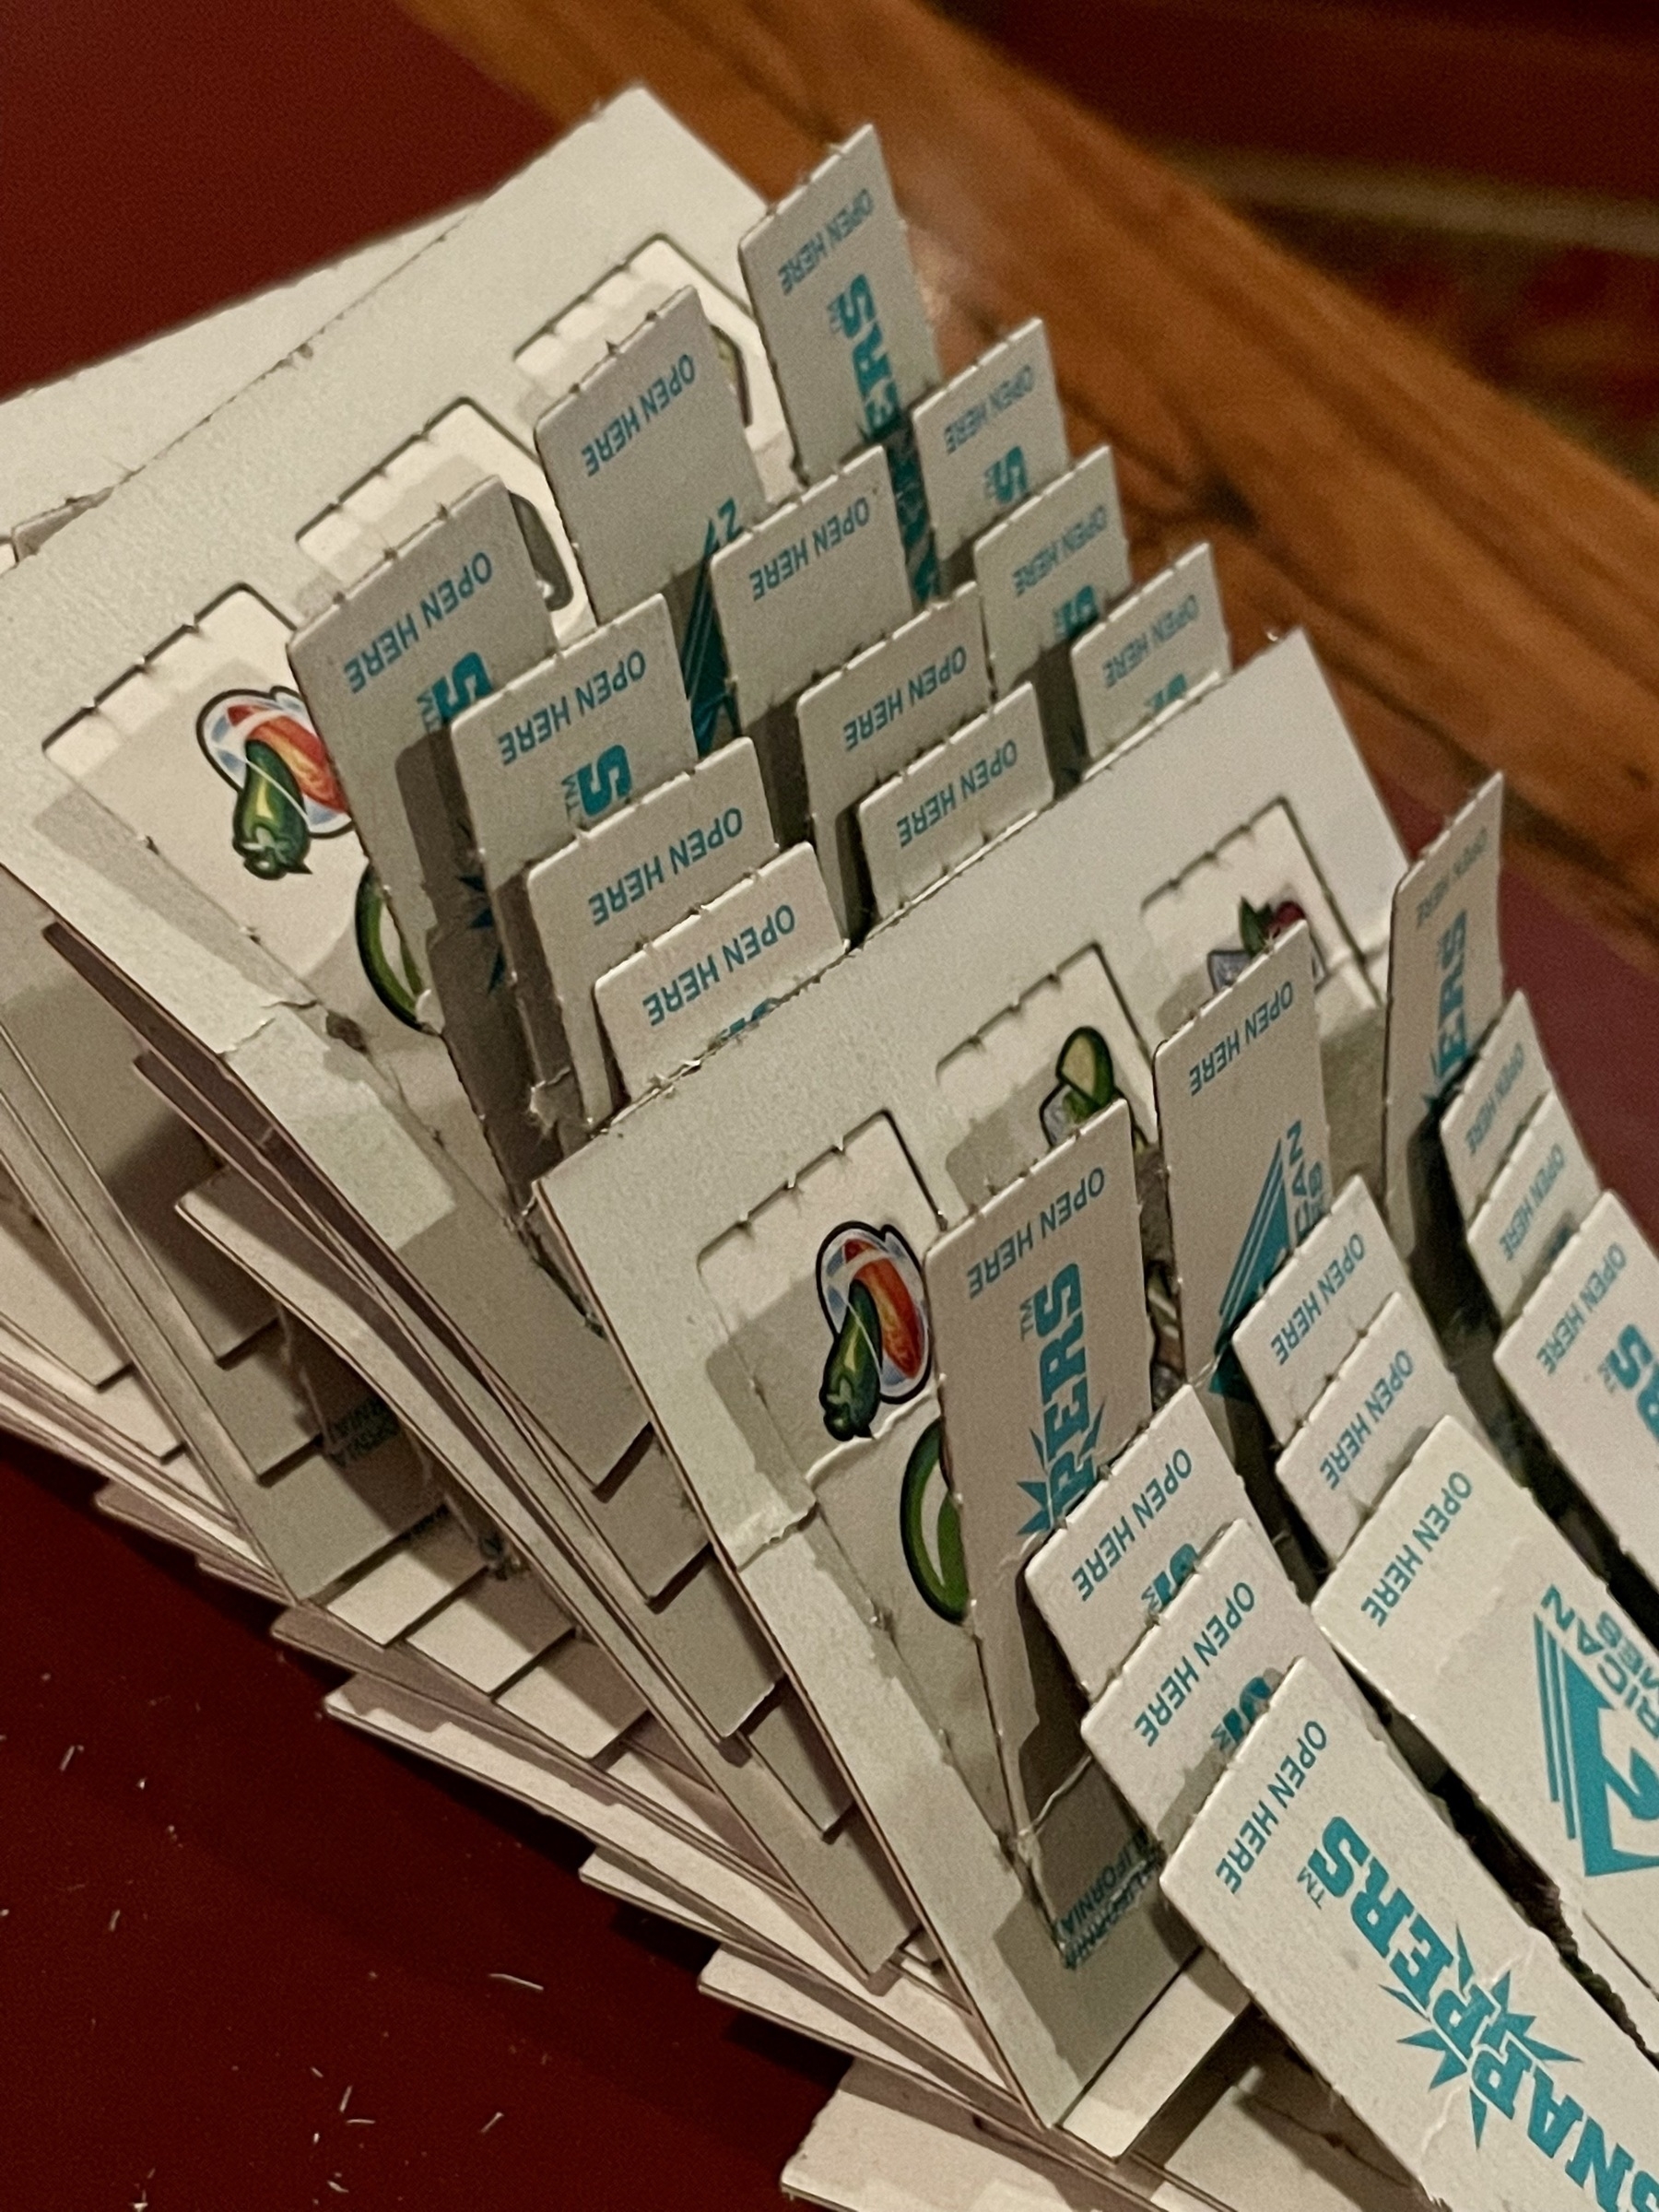 stack of Snappers-branded pull-tabs on table